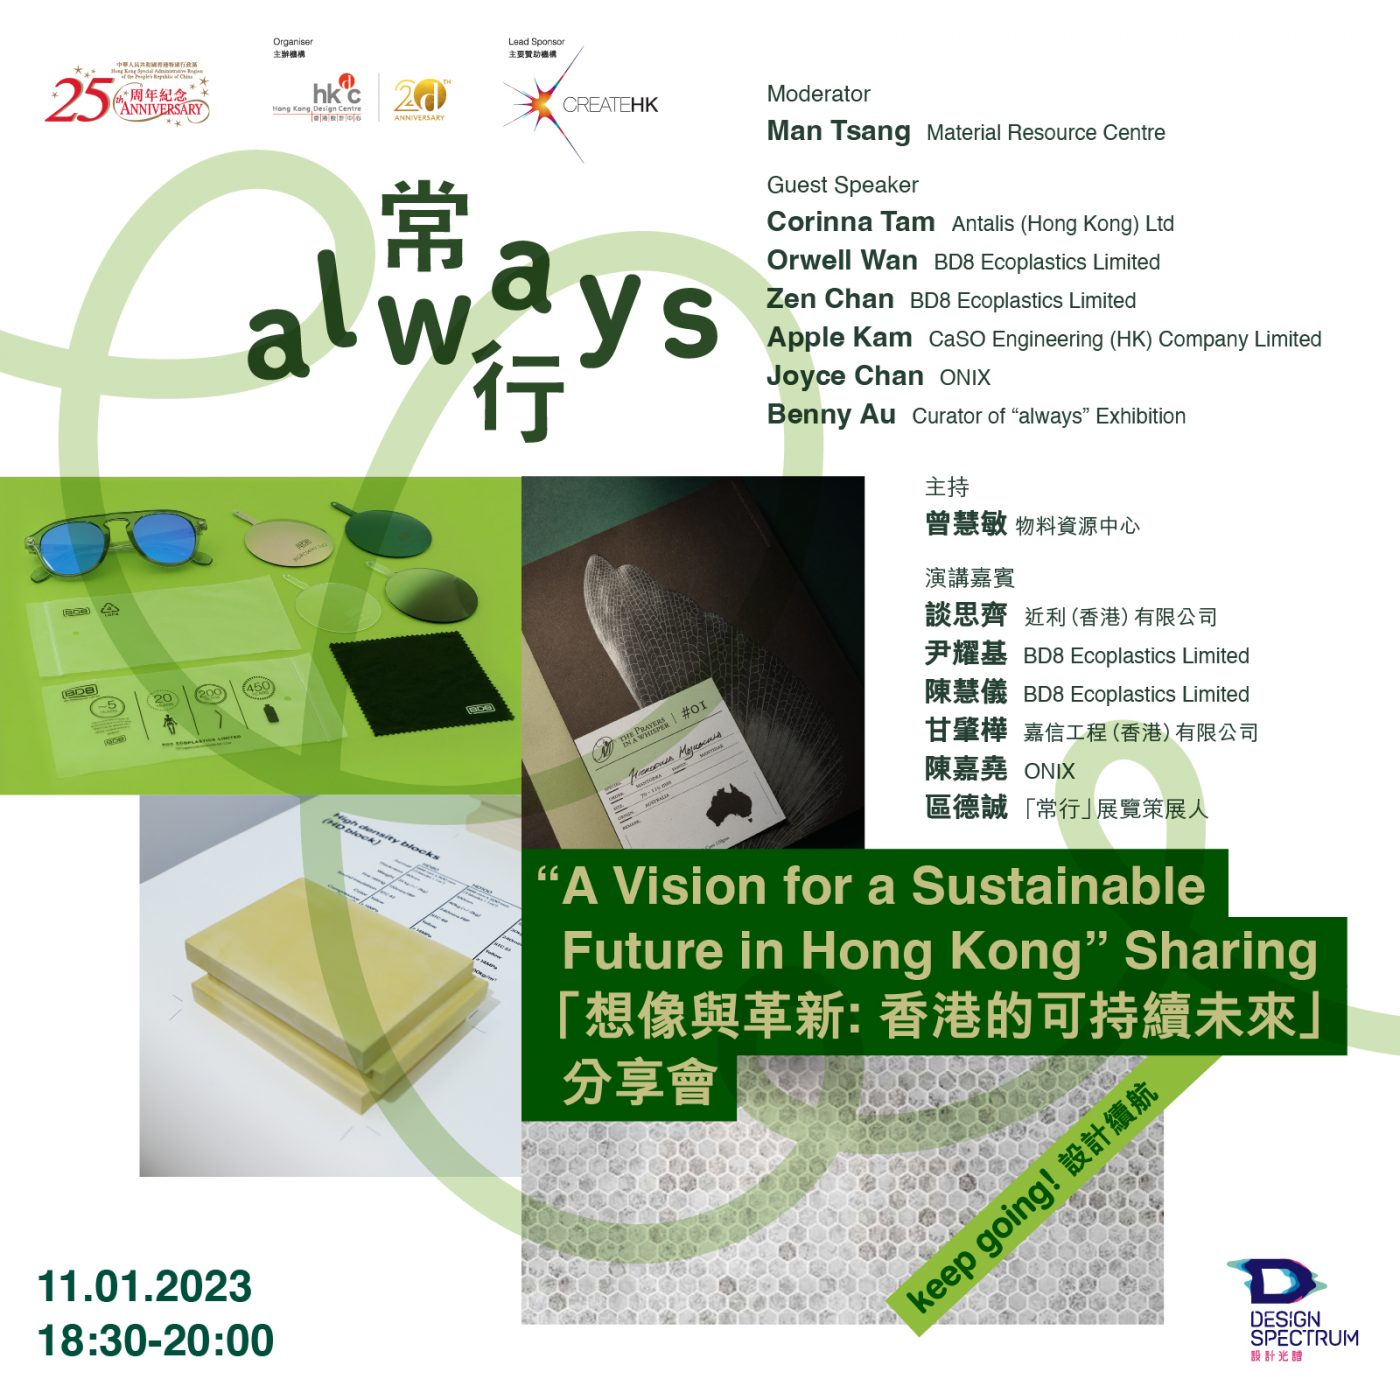 Design Spectruma-vision-for-a-sustainable-future-in-hong-kong-sharing